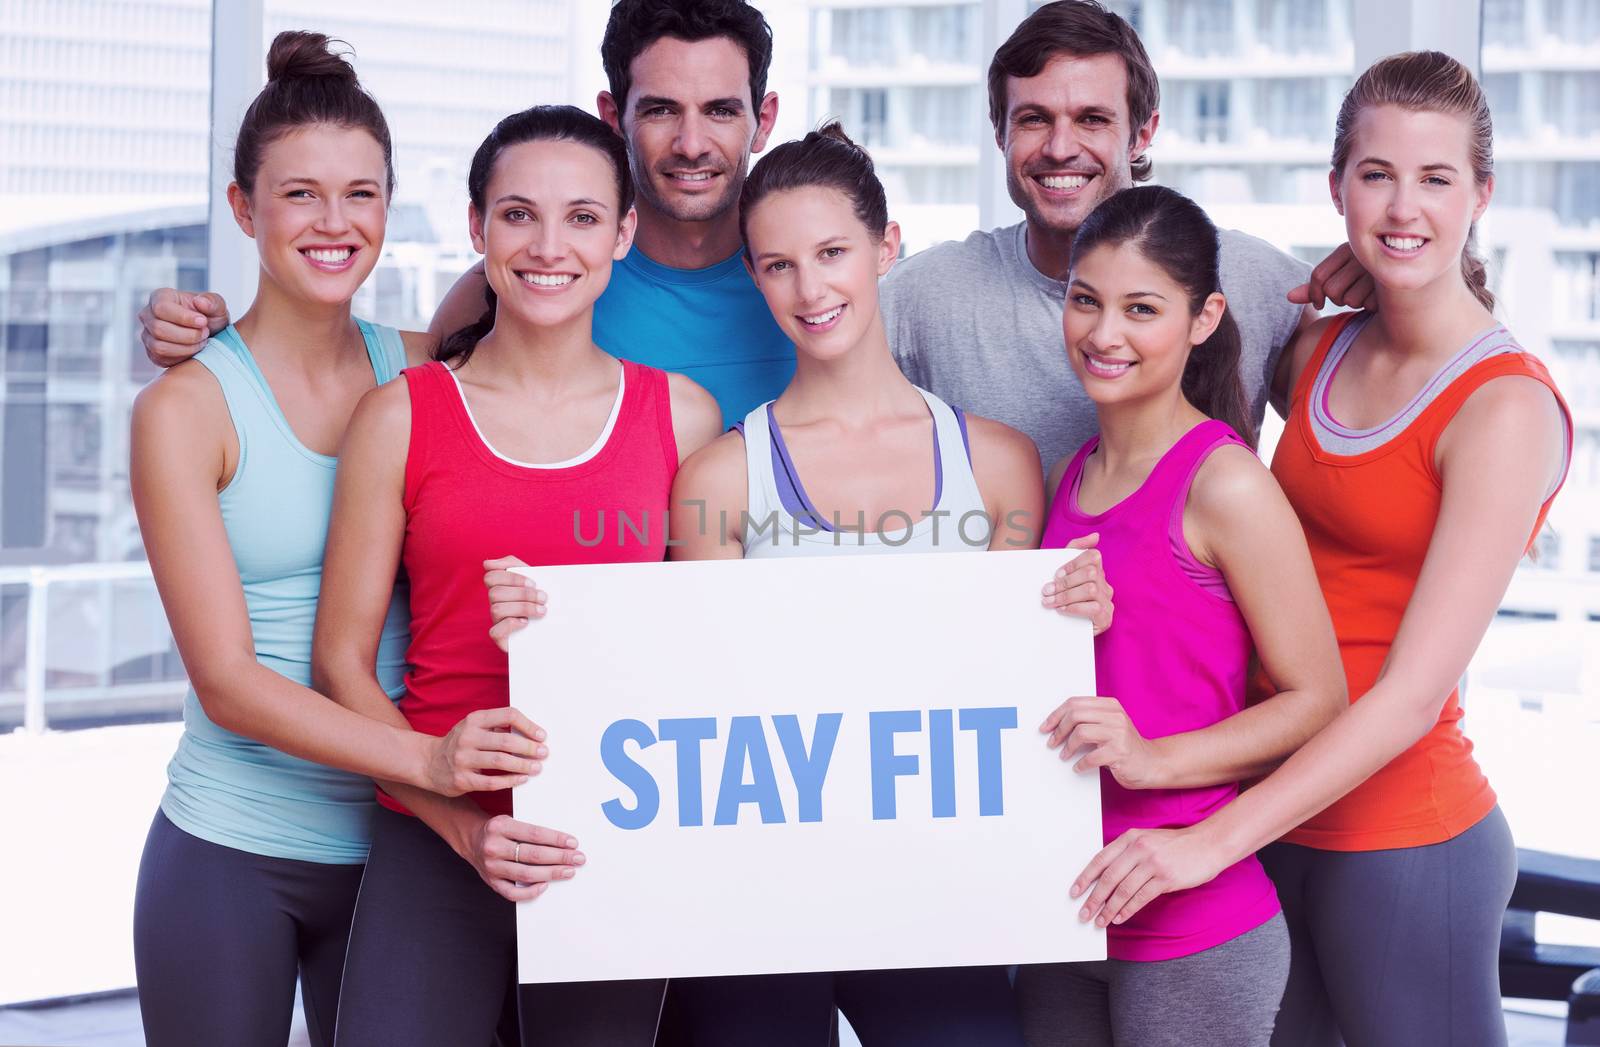 The word stay fit against fit smiling people holding blank board